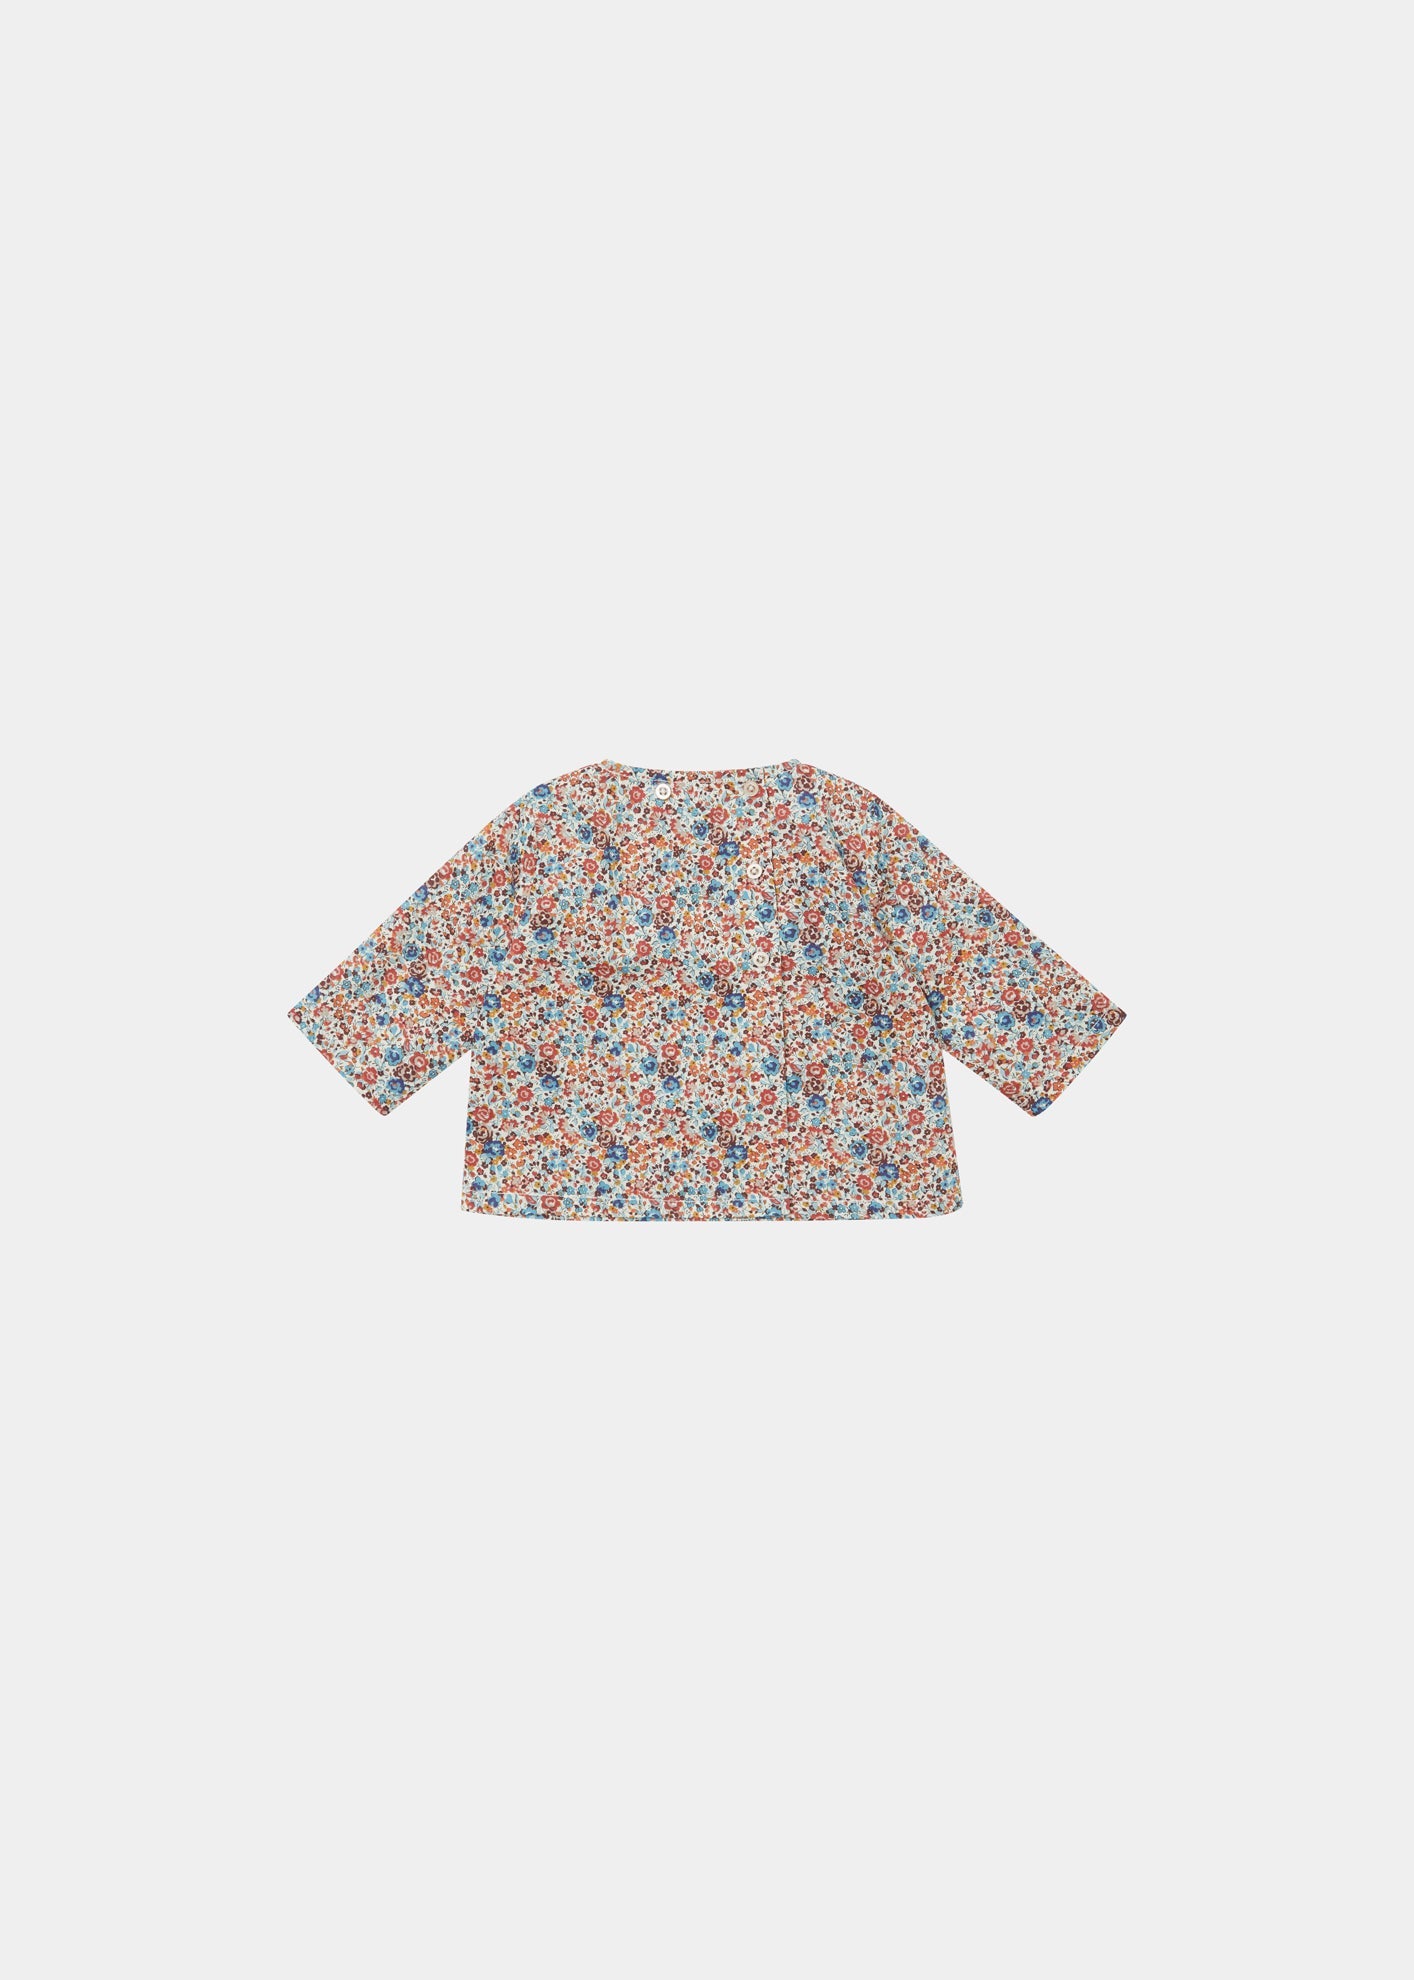 BLENNY BABY GIFTING TOP - BERRY LIBERTY PRINT